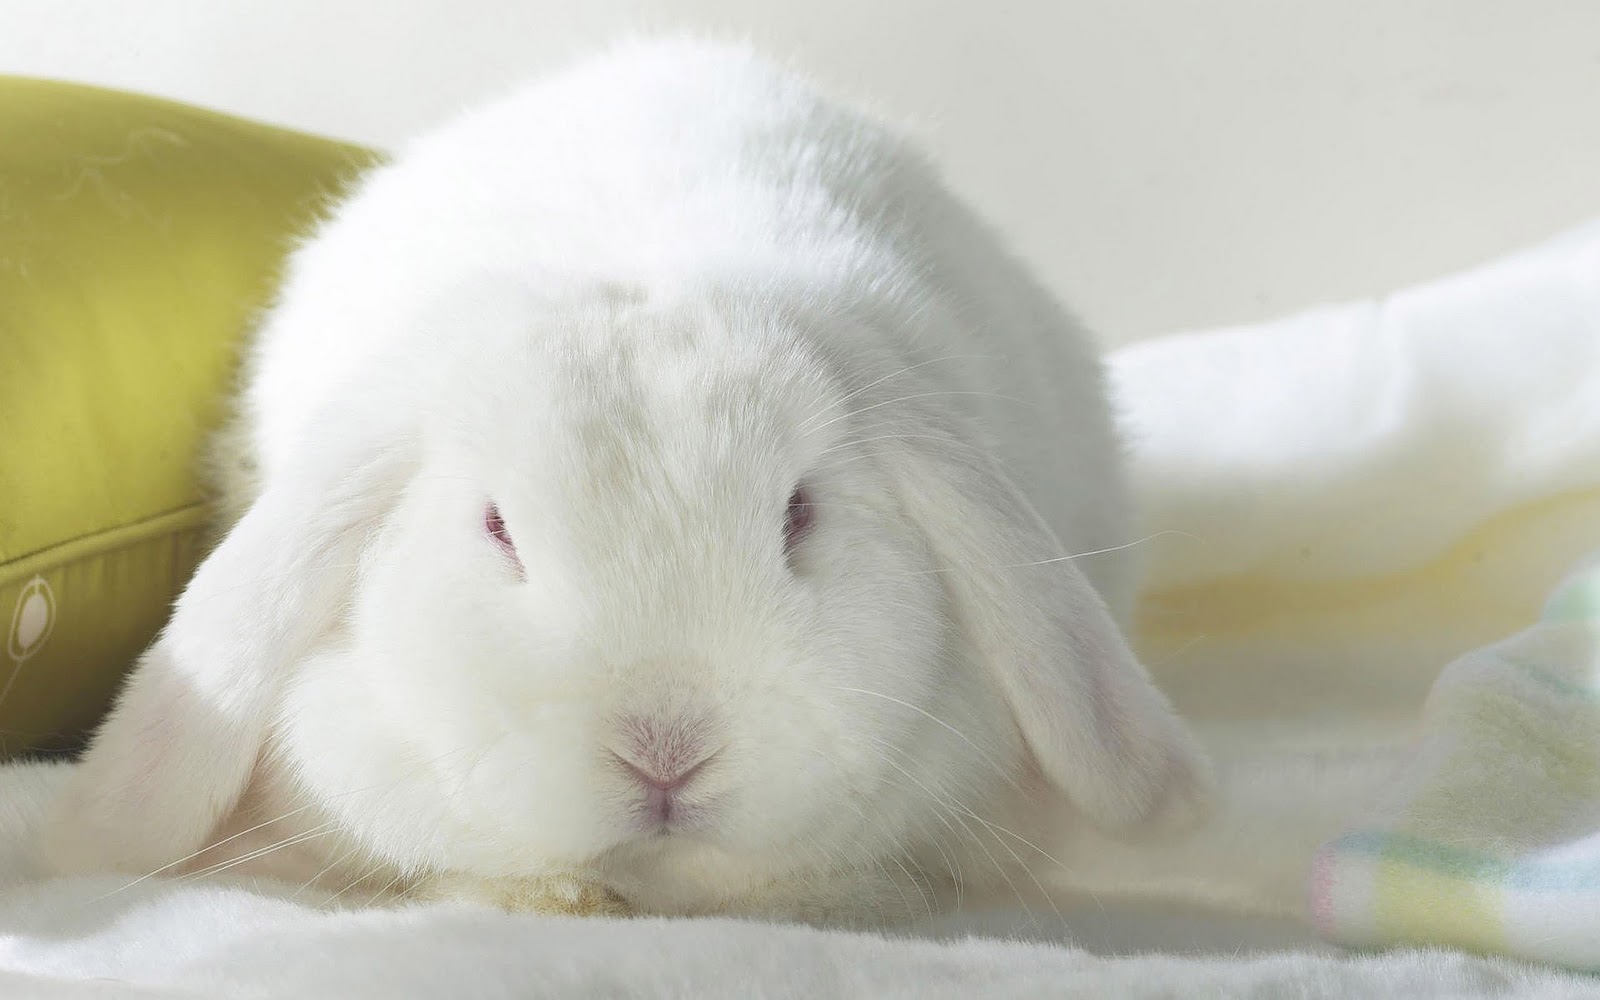 Cute White Rabbit Hd Wallpapers 2012 All About Real Hd Wallpapers